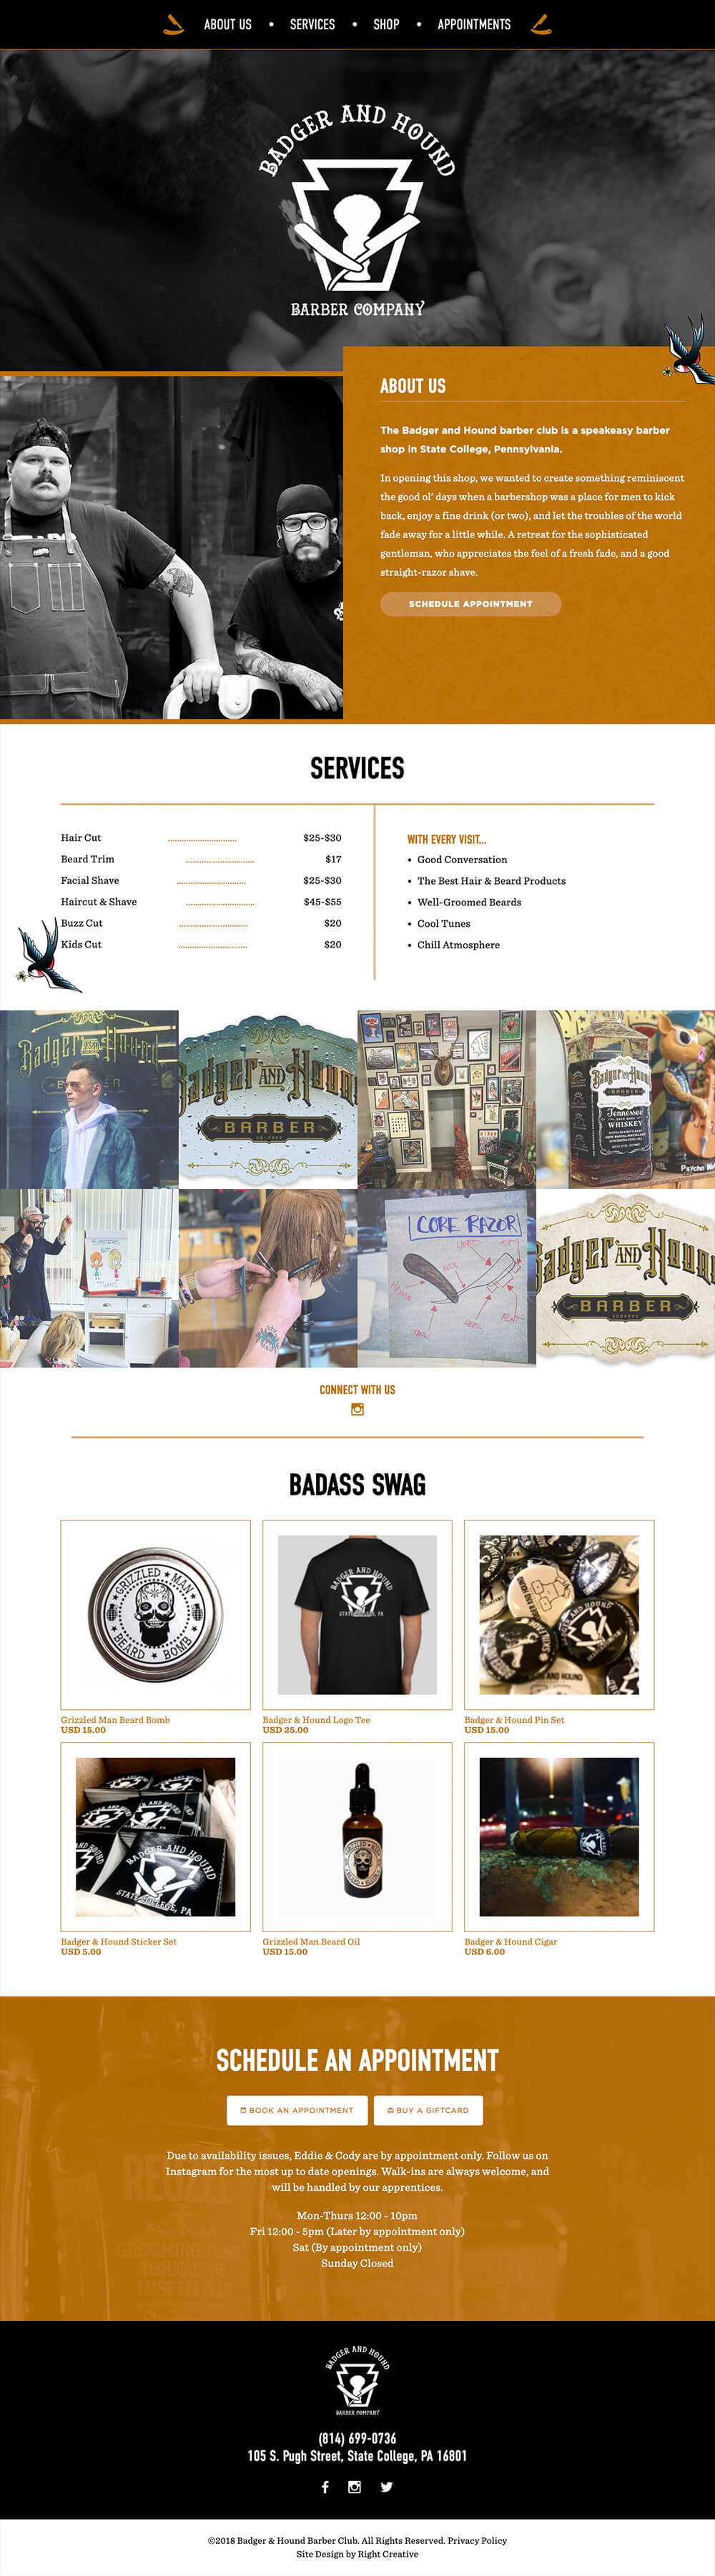 Full page screenshot of the Badger & Hound website.